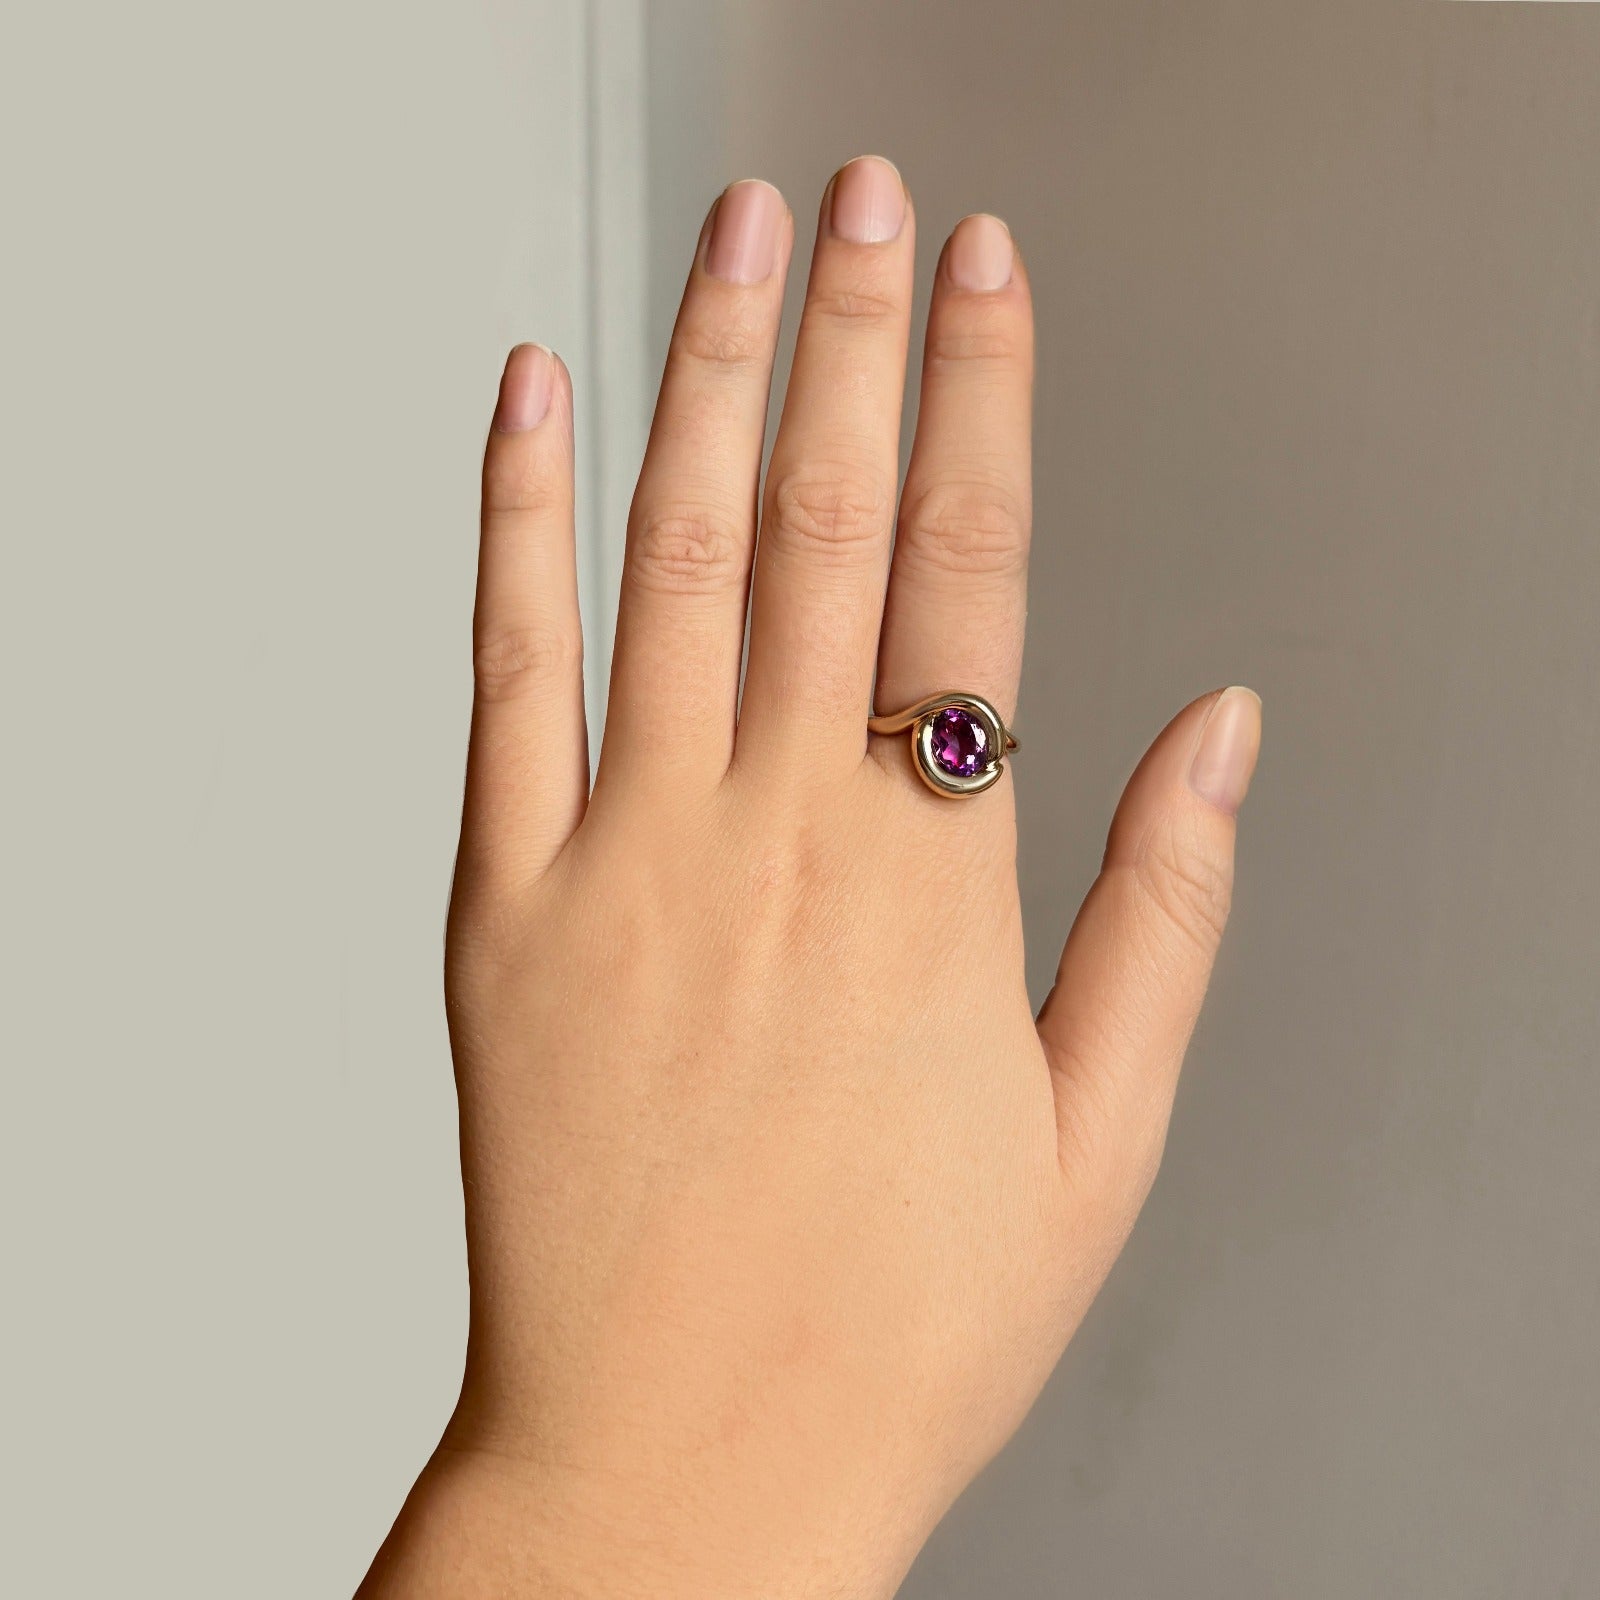 14k gold Molten Knot Ring styled on a hand - Amethyst